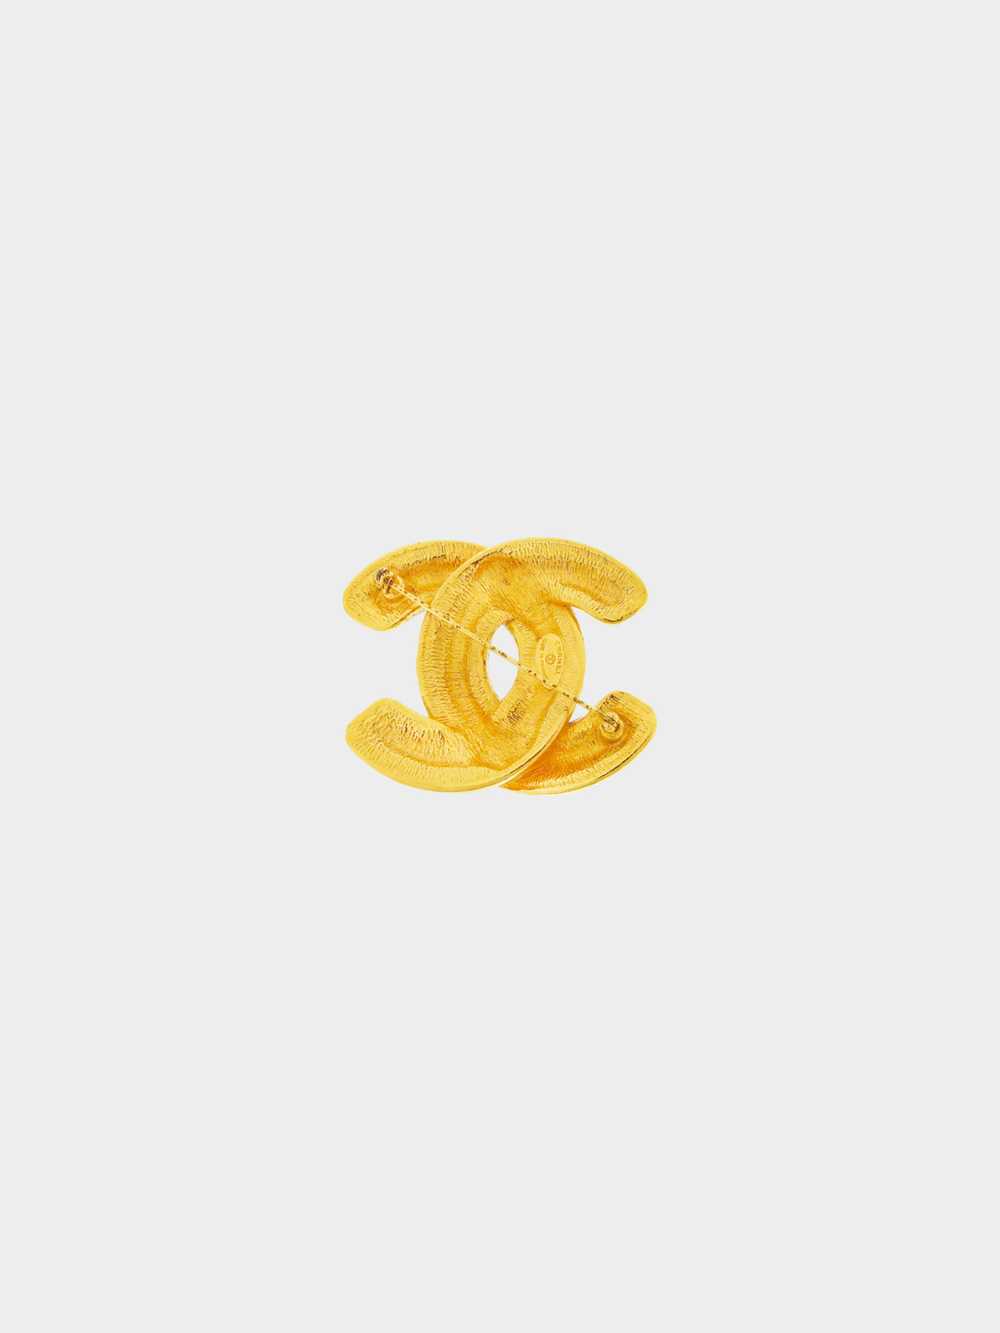 Chanel 1980s Vintage Gold Quilted Brooch - image 2